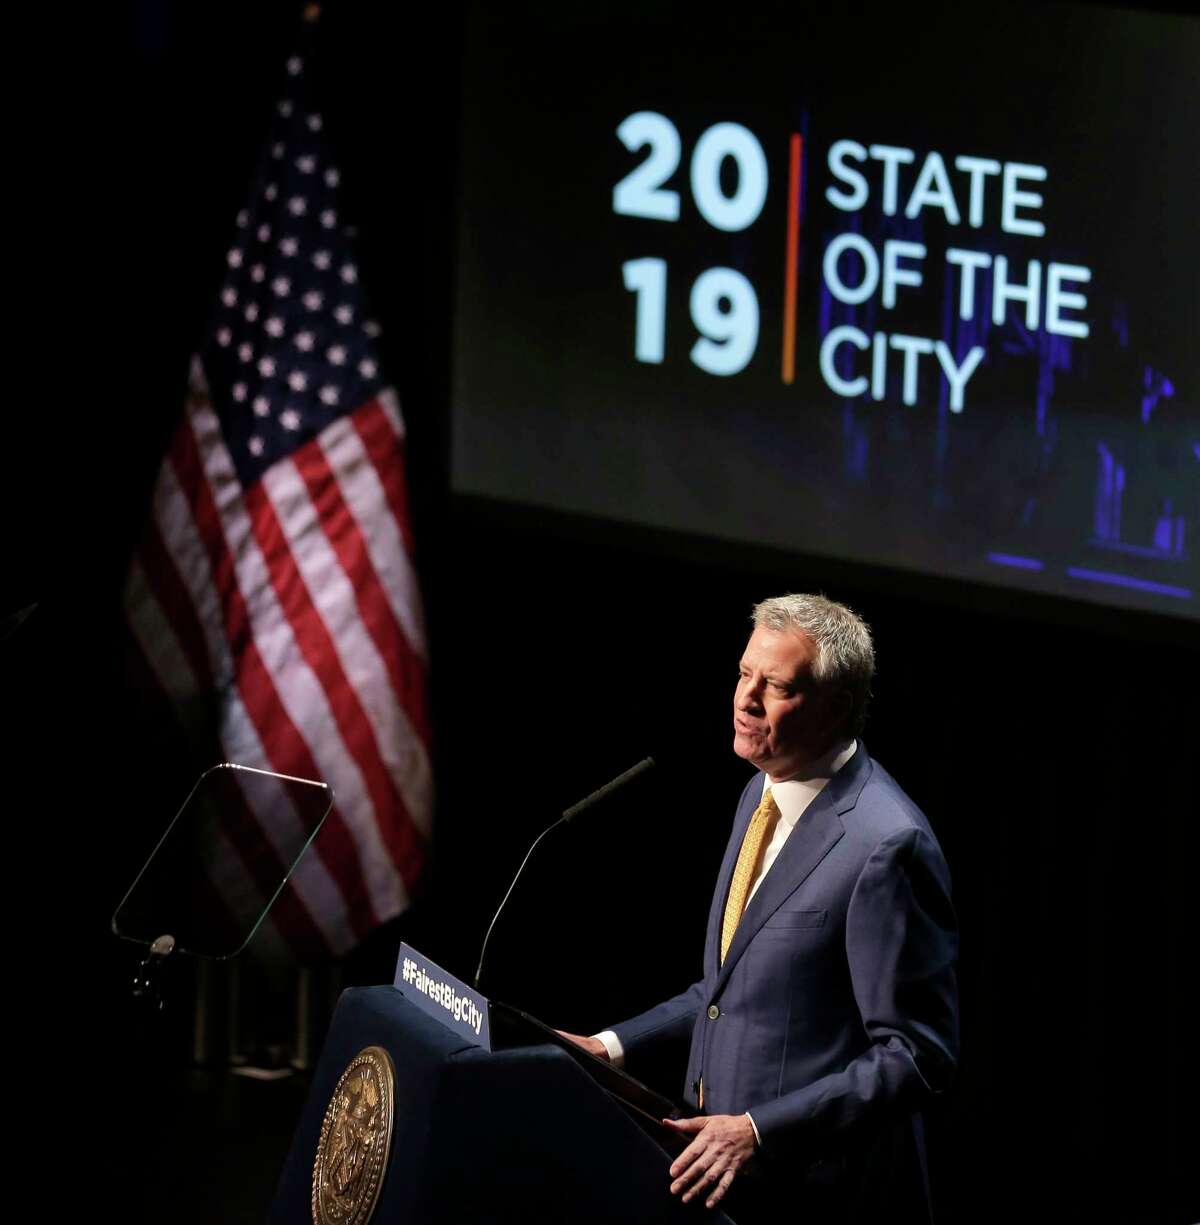 New York City Mayor Bill de Blasio speaks at his State of the City address in New York, Thursday, Jan. 10, 2019. De Blasio said he would create a city-managed retirement fund for workers who lack access to employer-sponsored funds as well as a new Office to Protect Tenants. (AP Photo/Seth Wenig)